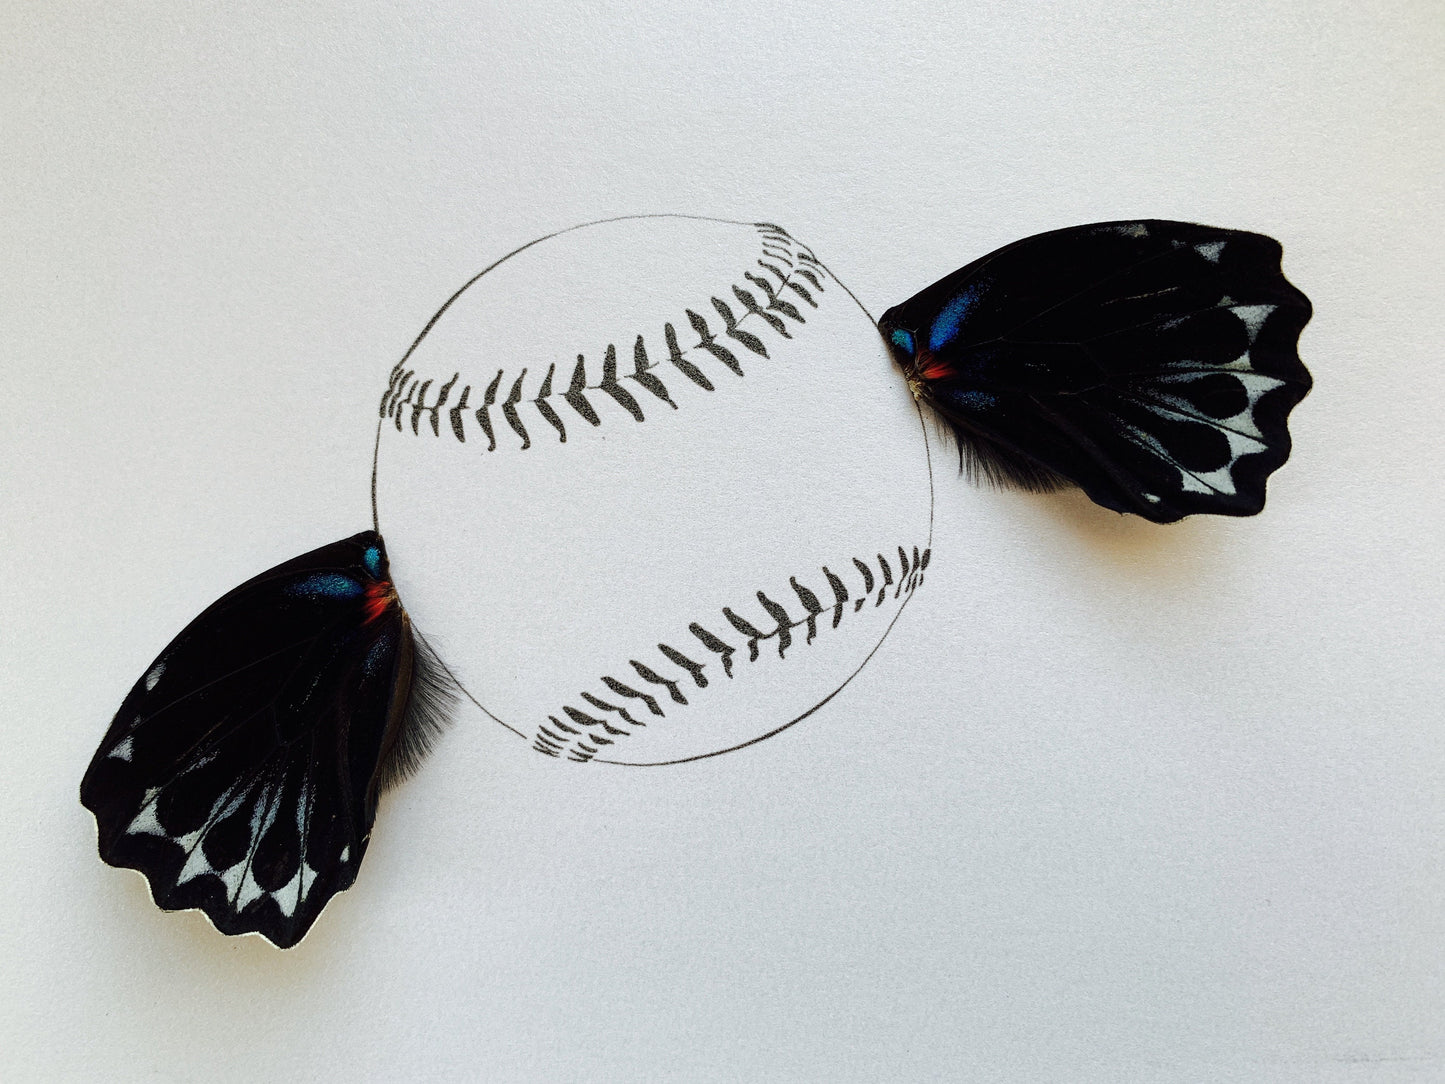 Fly Ball Baseball Real Butterfly Wing Art Ethically Sourced Made in MN USA - Holly Ulm - Isms Butterfly Conservation Art